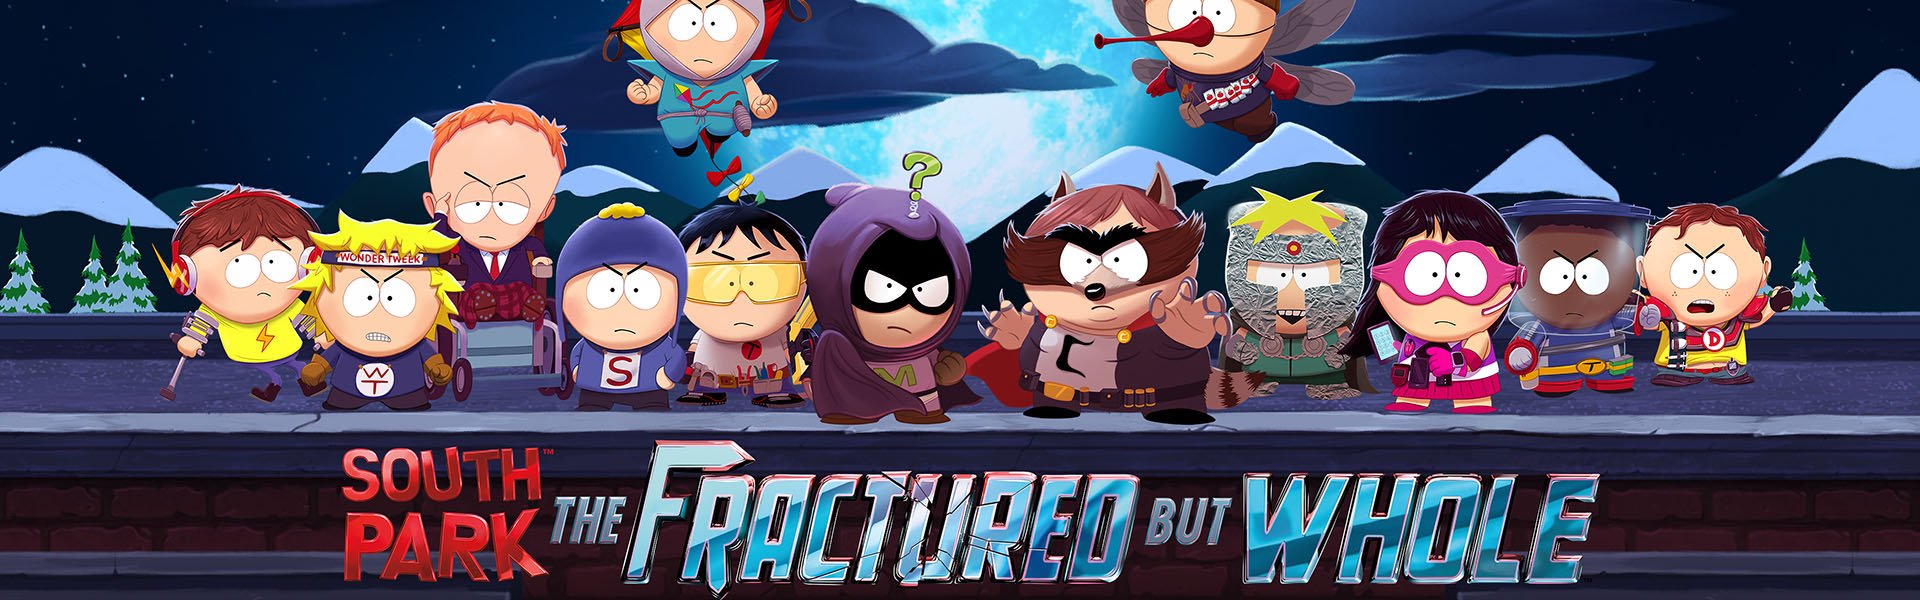 South Park: The Fractured But Whole Review 23